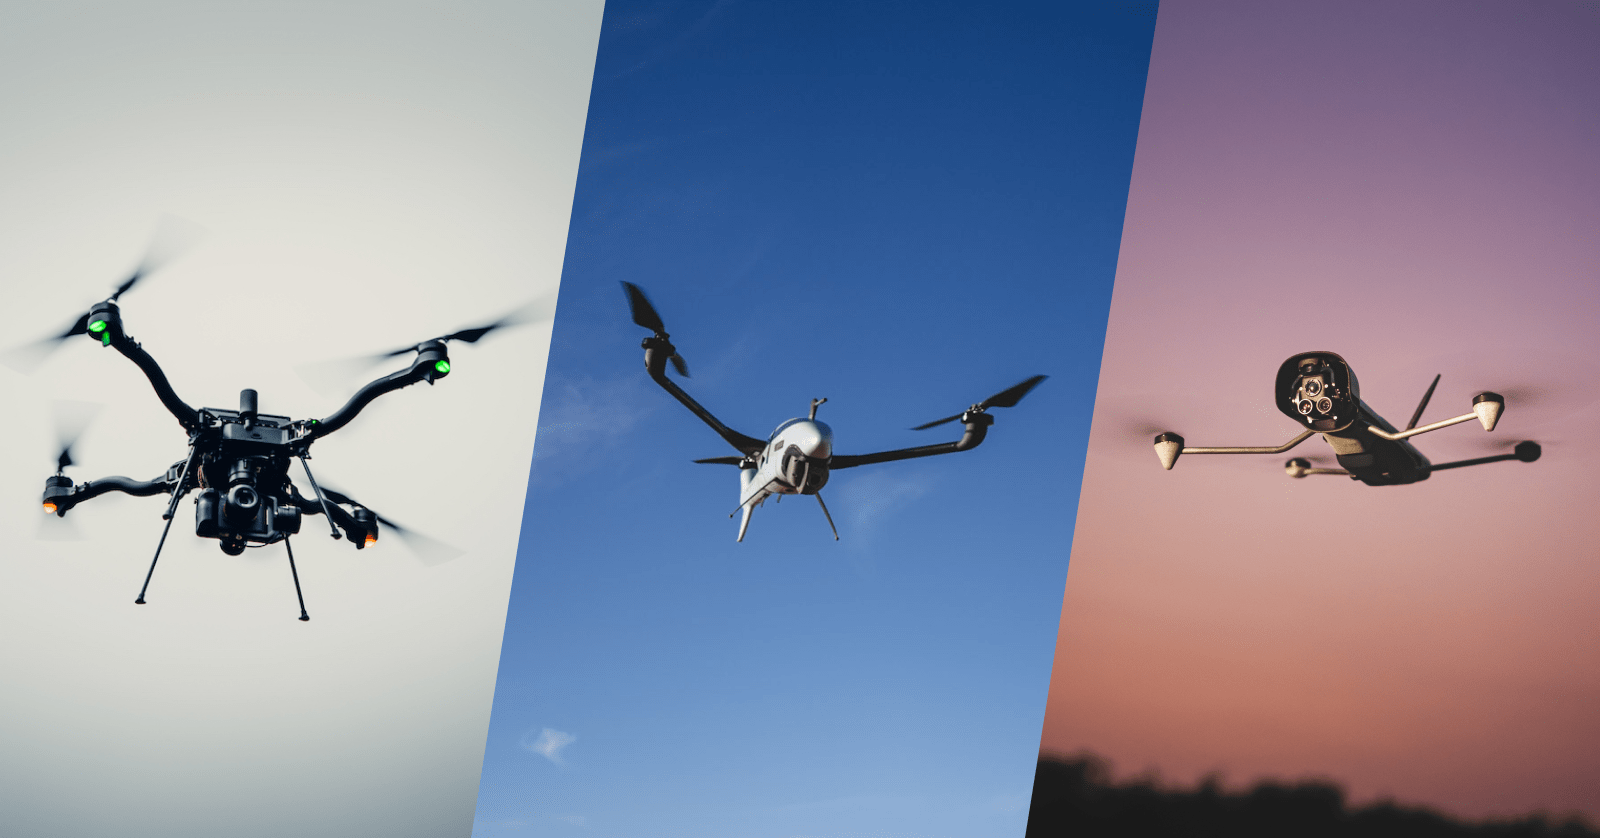 Drones in 2020 are Software defined